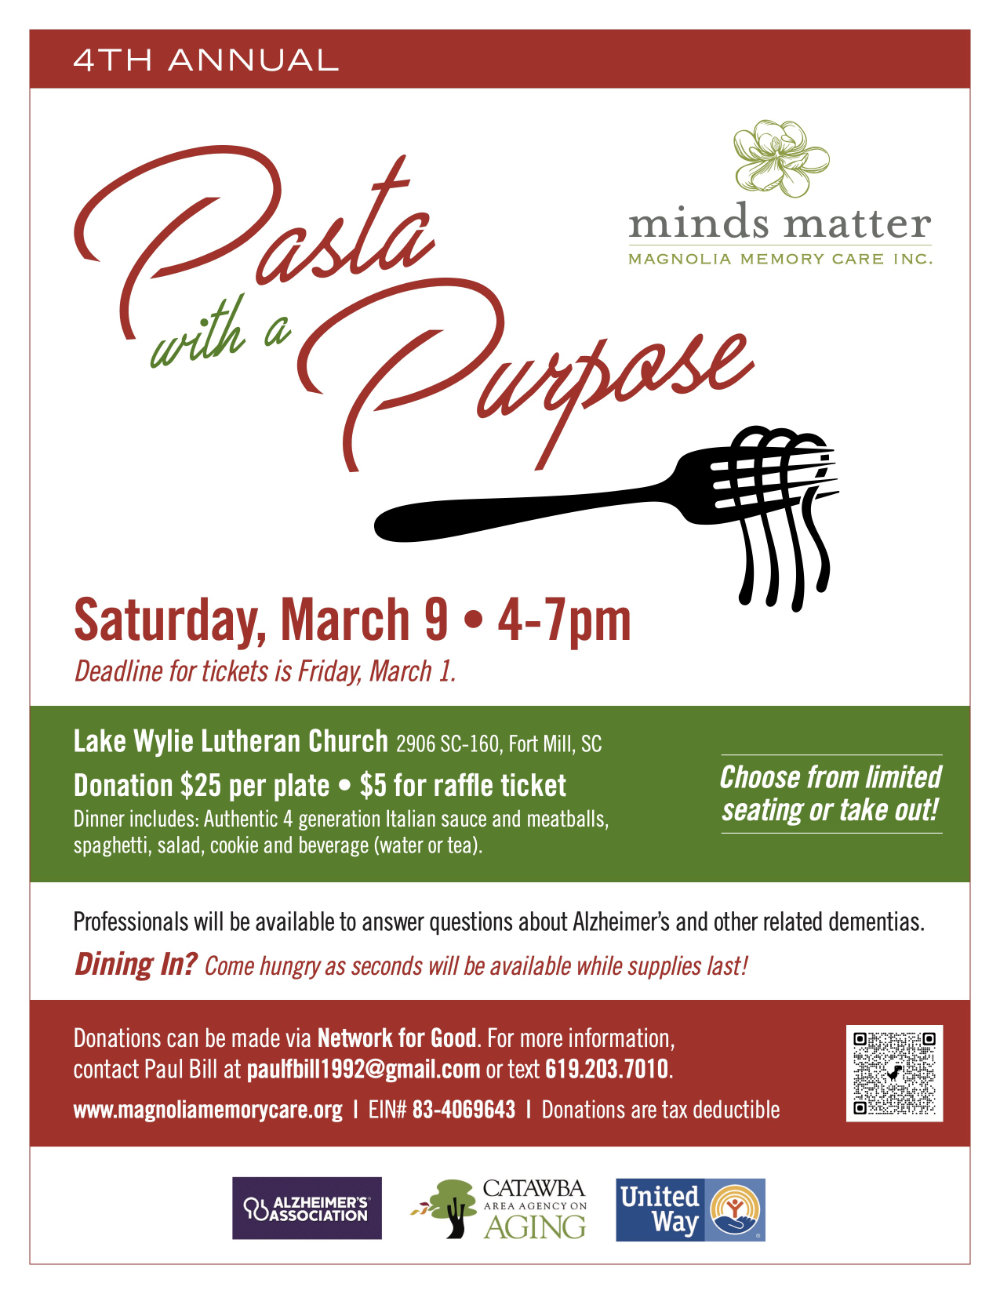 Pasta with a purpose fundraiser in Fort Mill, SC